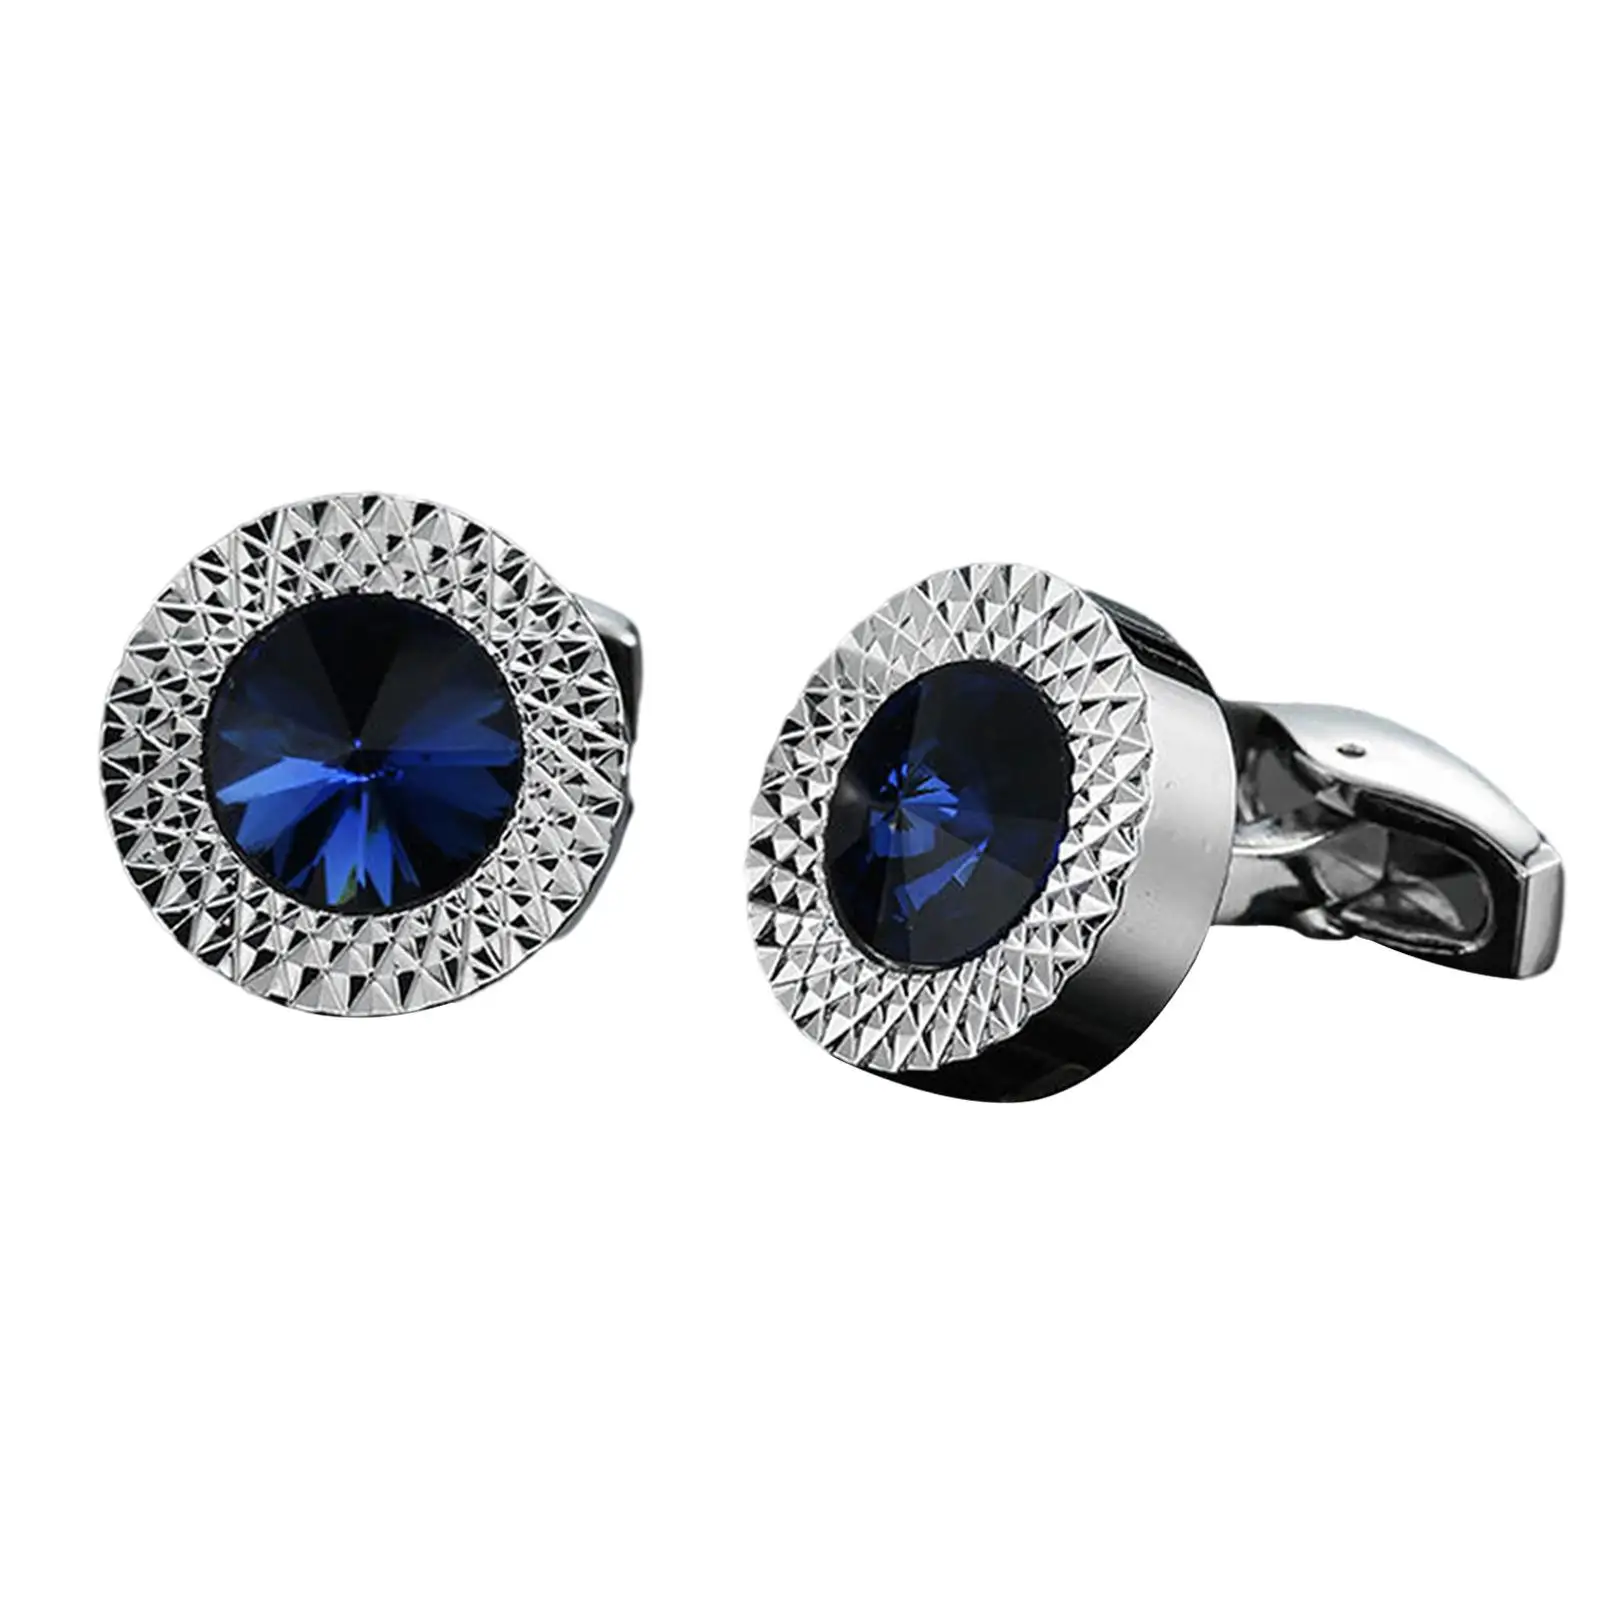 Classy Stylish Cuff Links Jewelry Simply French Accessories for Wedding